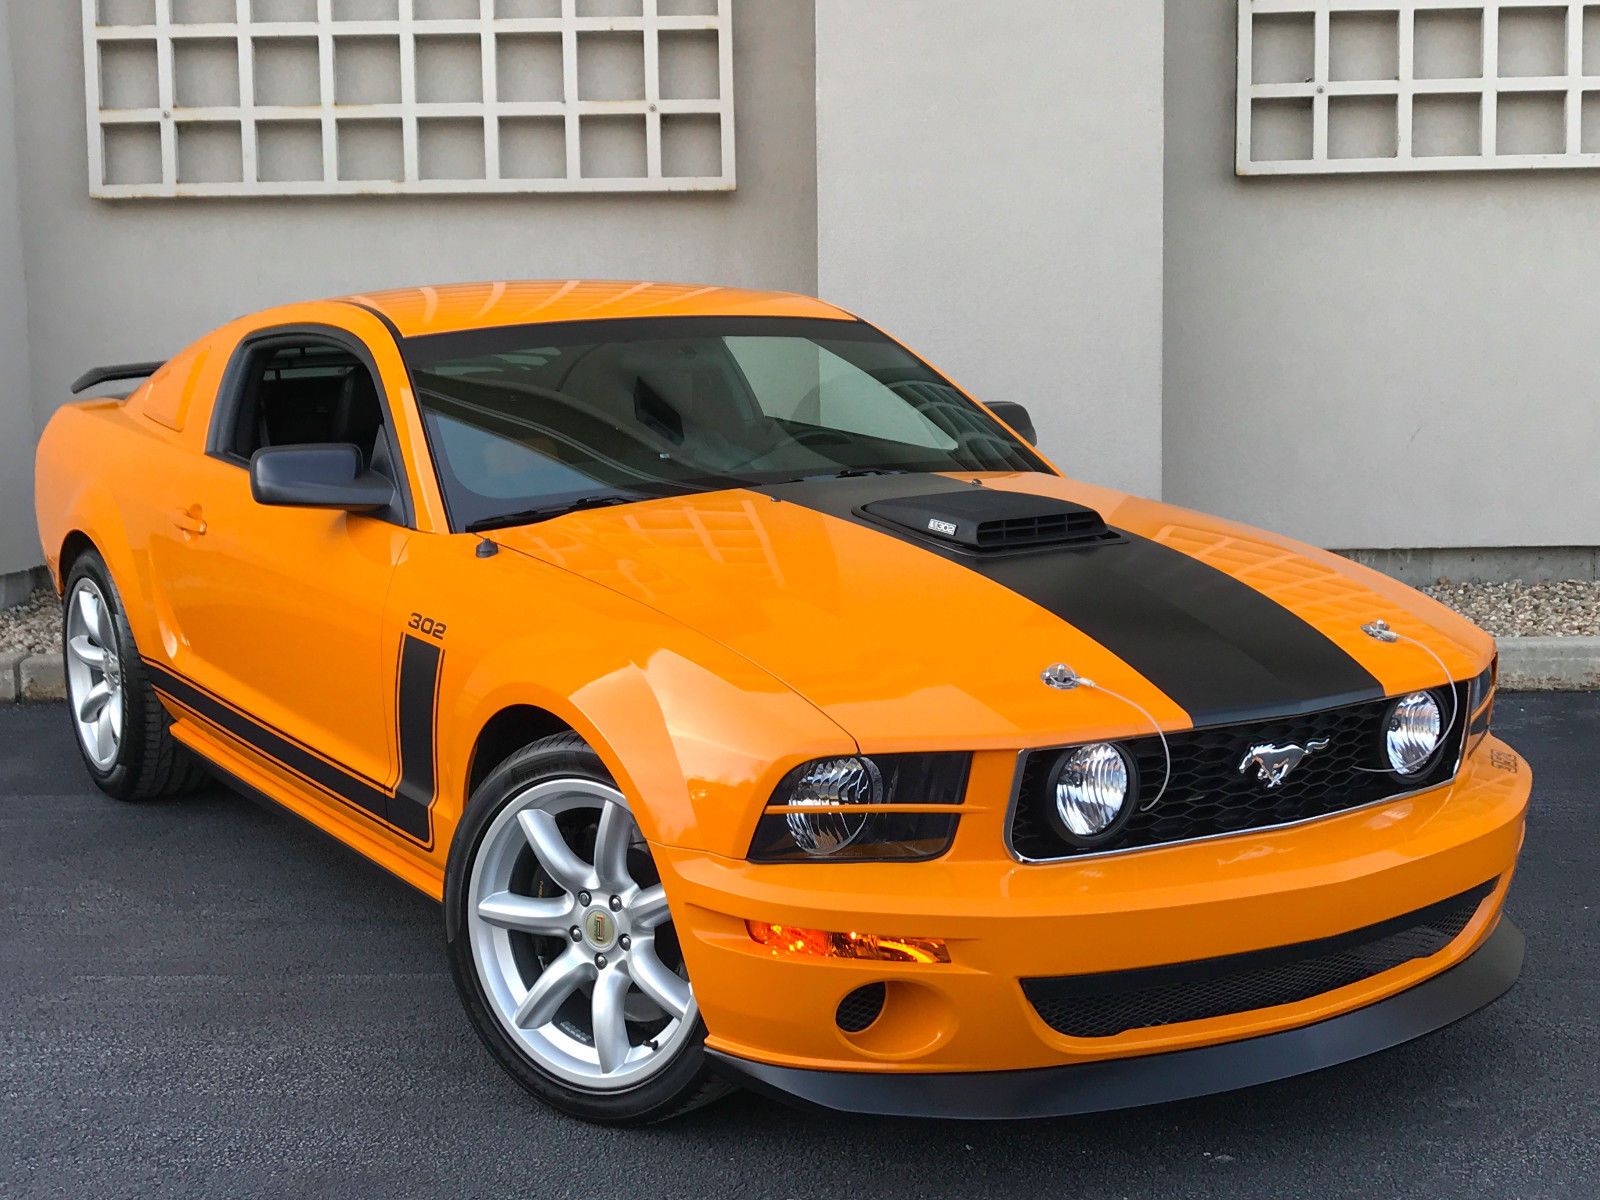 2007 Ford Mustang Saleen Parnelli Jones Limited Edition in orange with black racing accent stripes